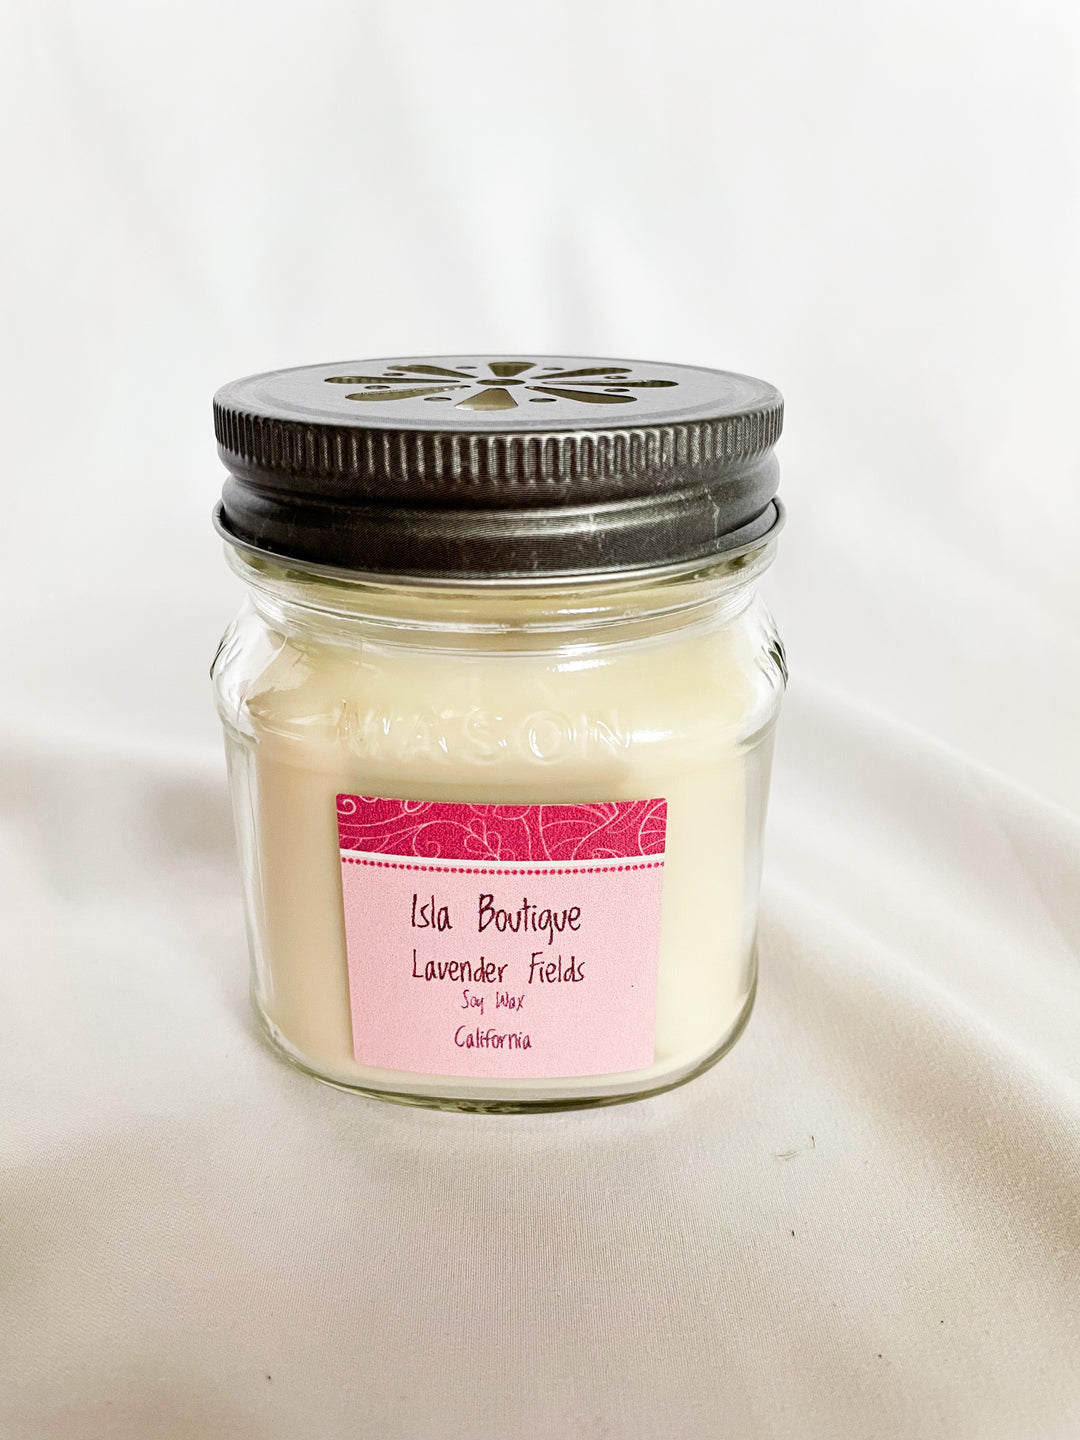 California made Lavender Fields Soy Wax Candle 8oz